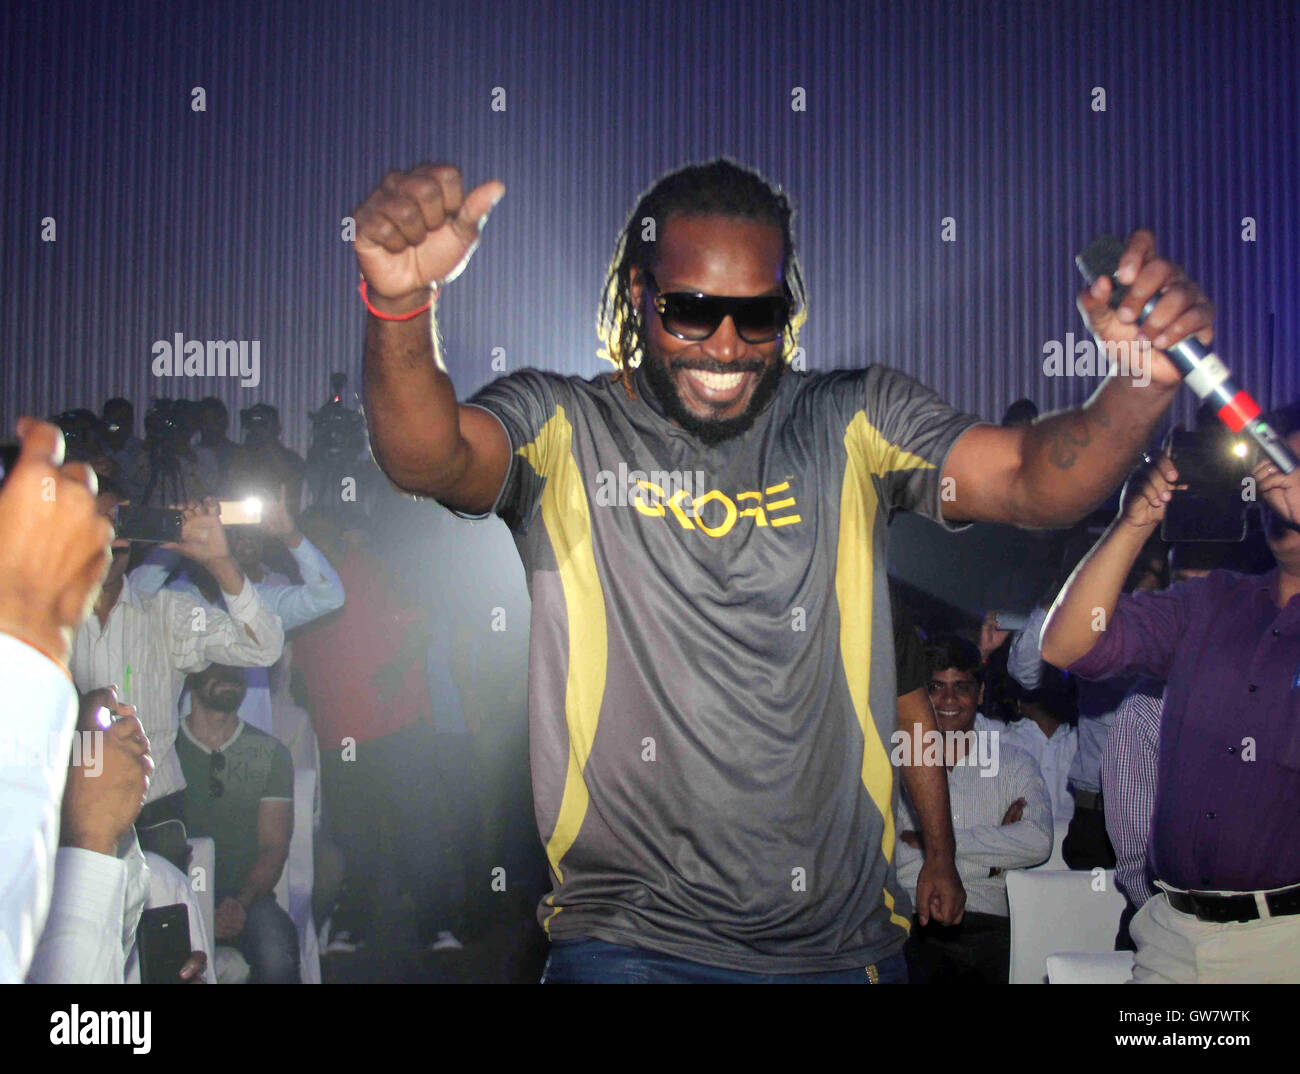 West Indies cricket player Chris Gayle during the launch of Skore champion series condoms, in Mumbai Stock Photo